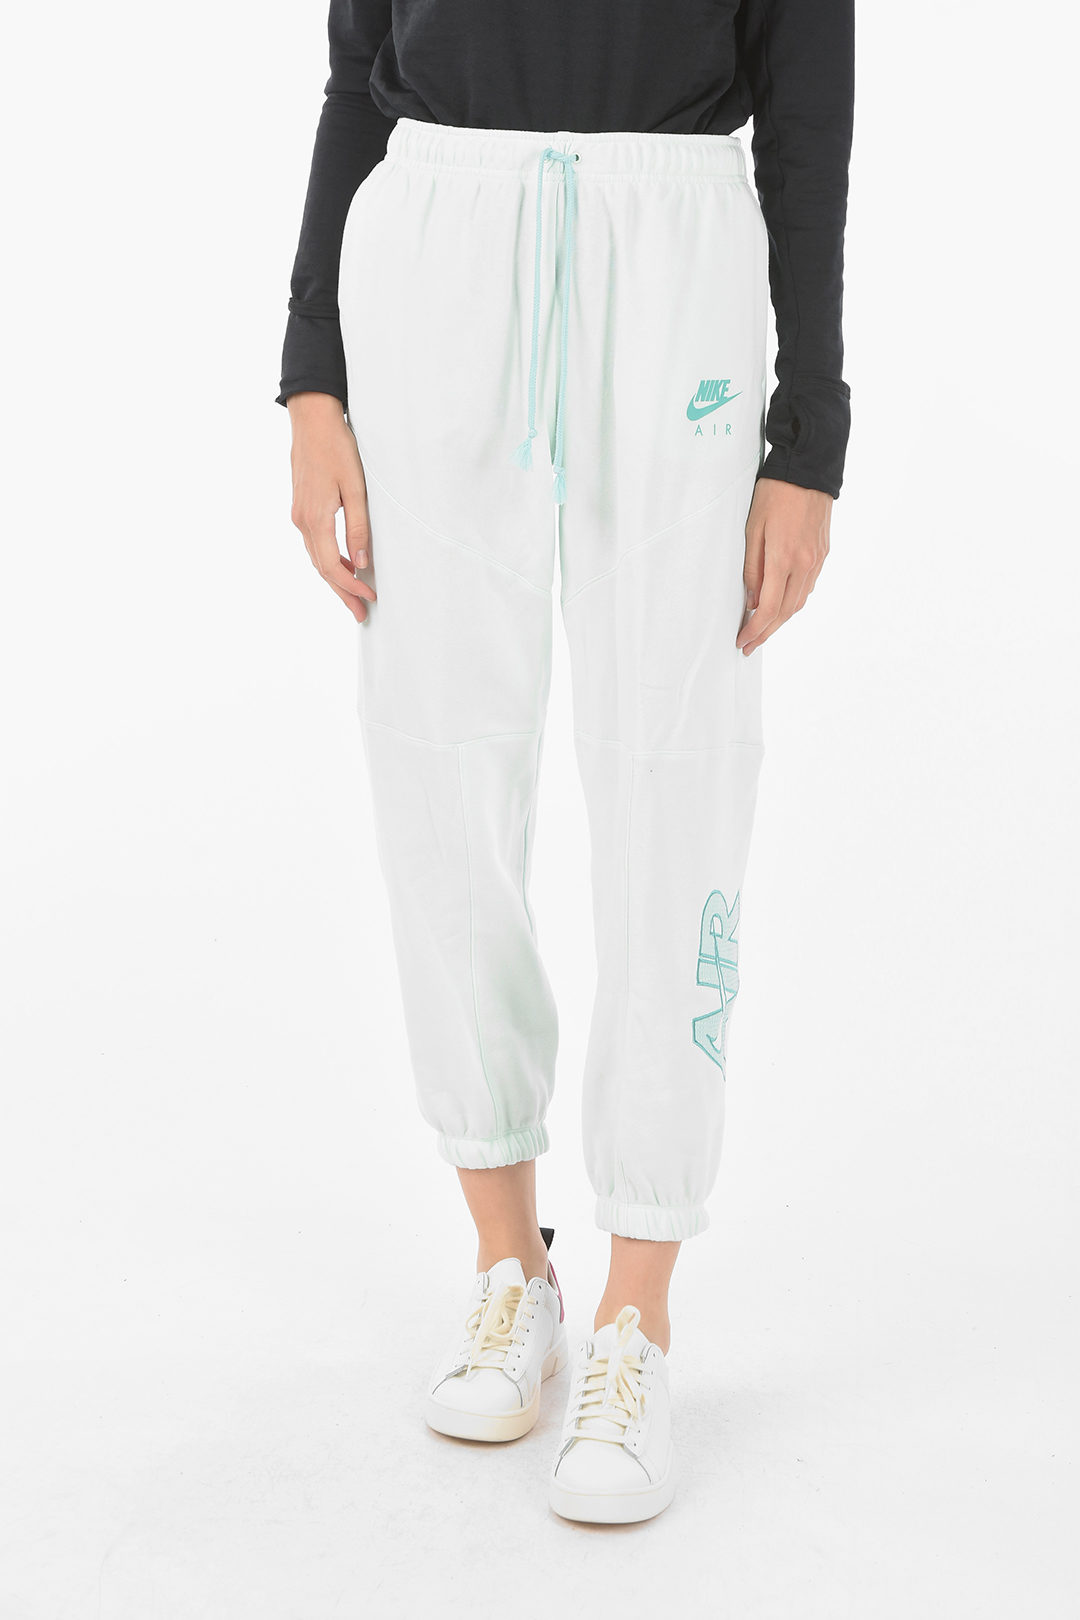 Nike AIR Logo Embroidered Loose Fit Jogger women - Glamood Outlet